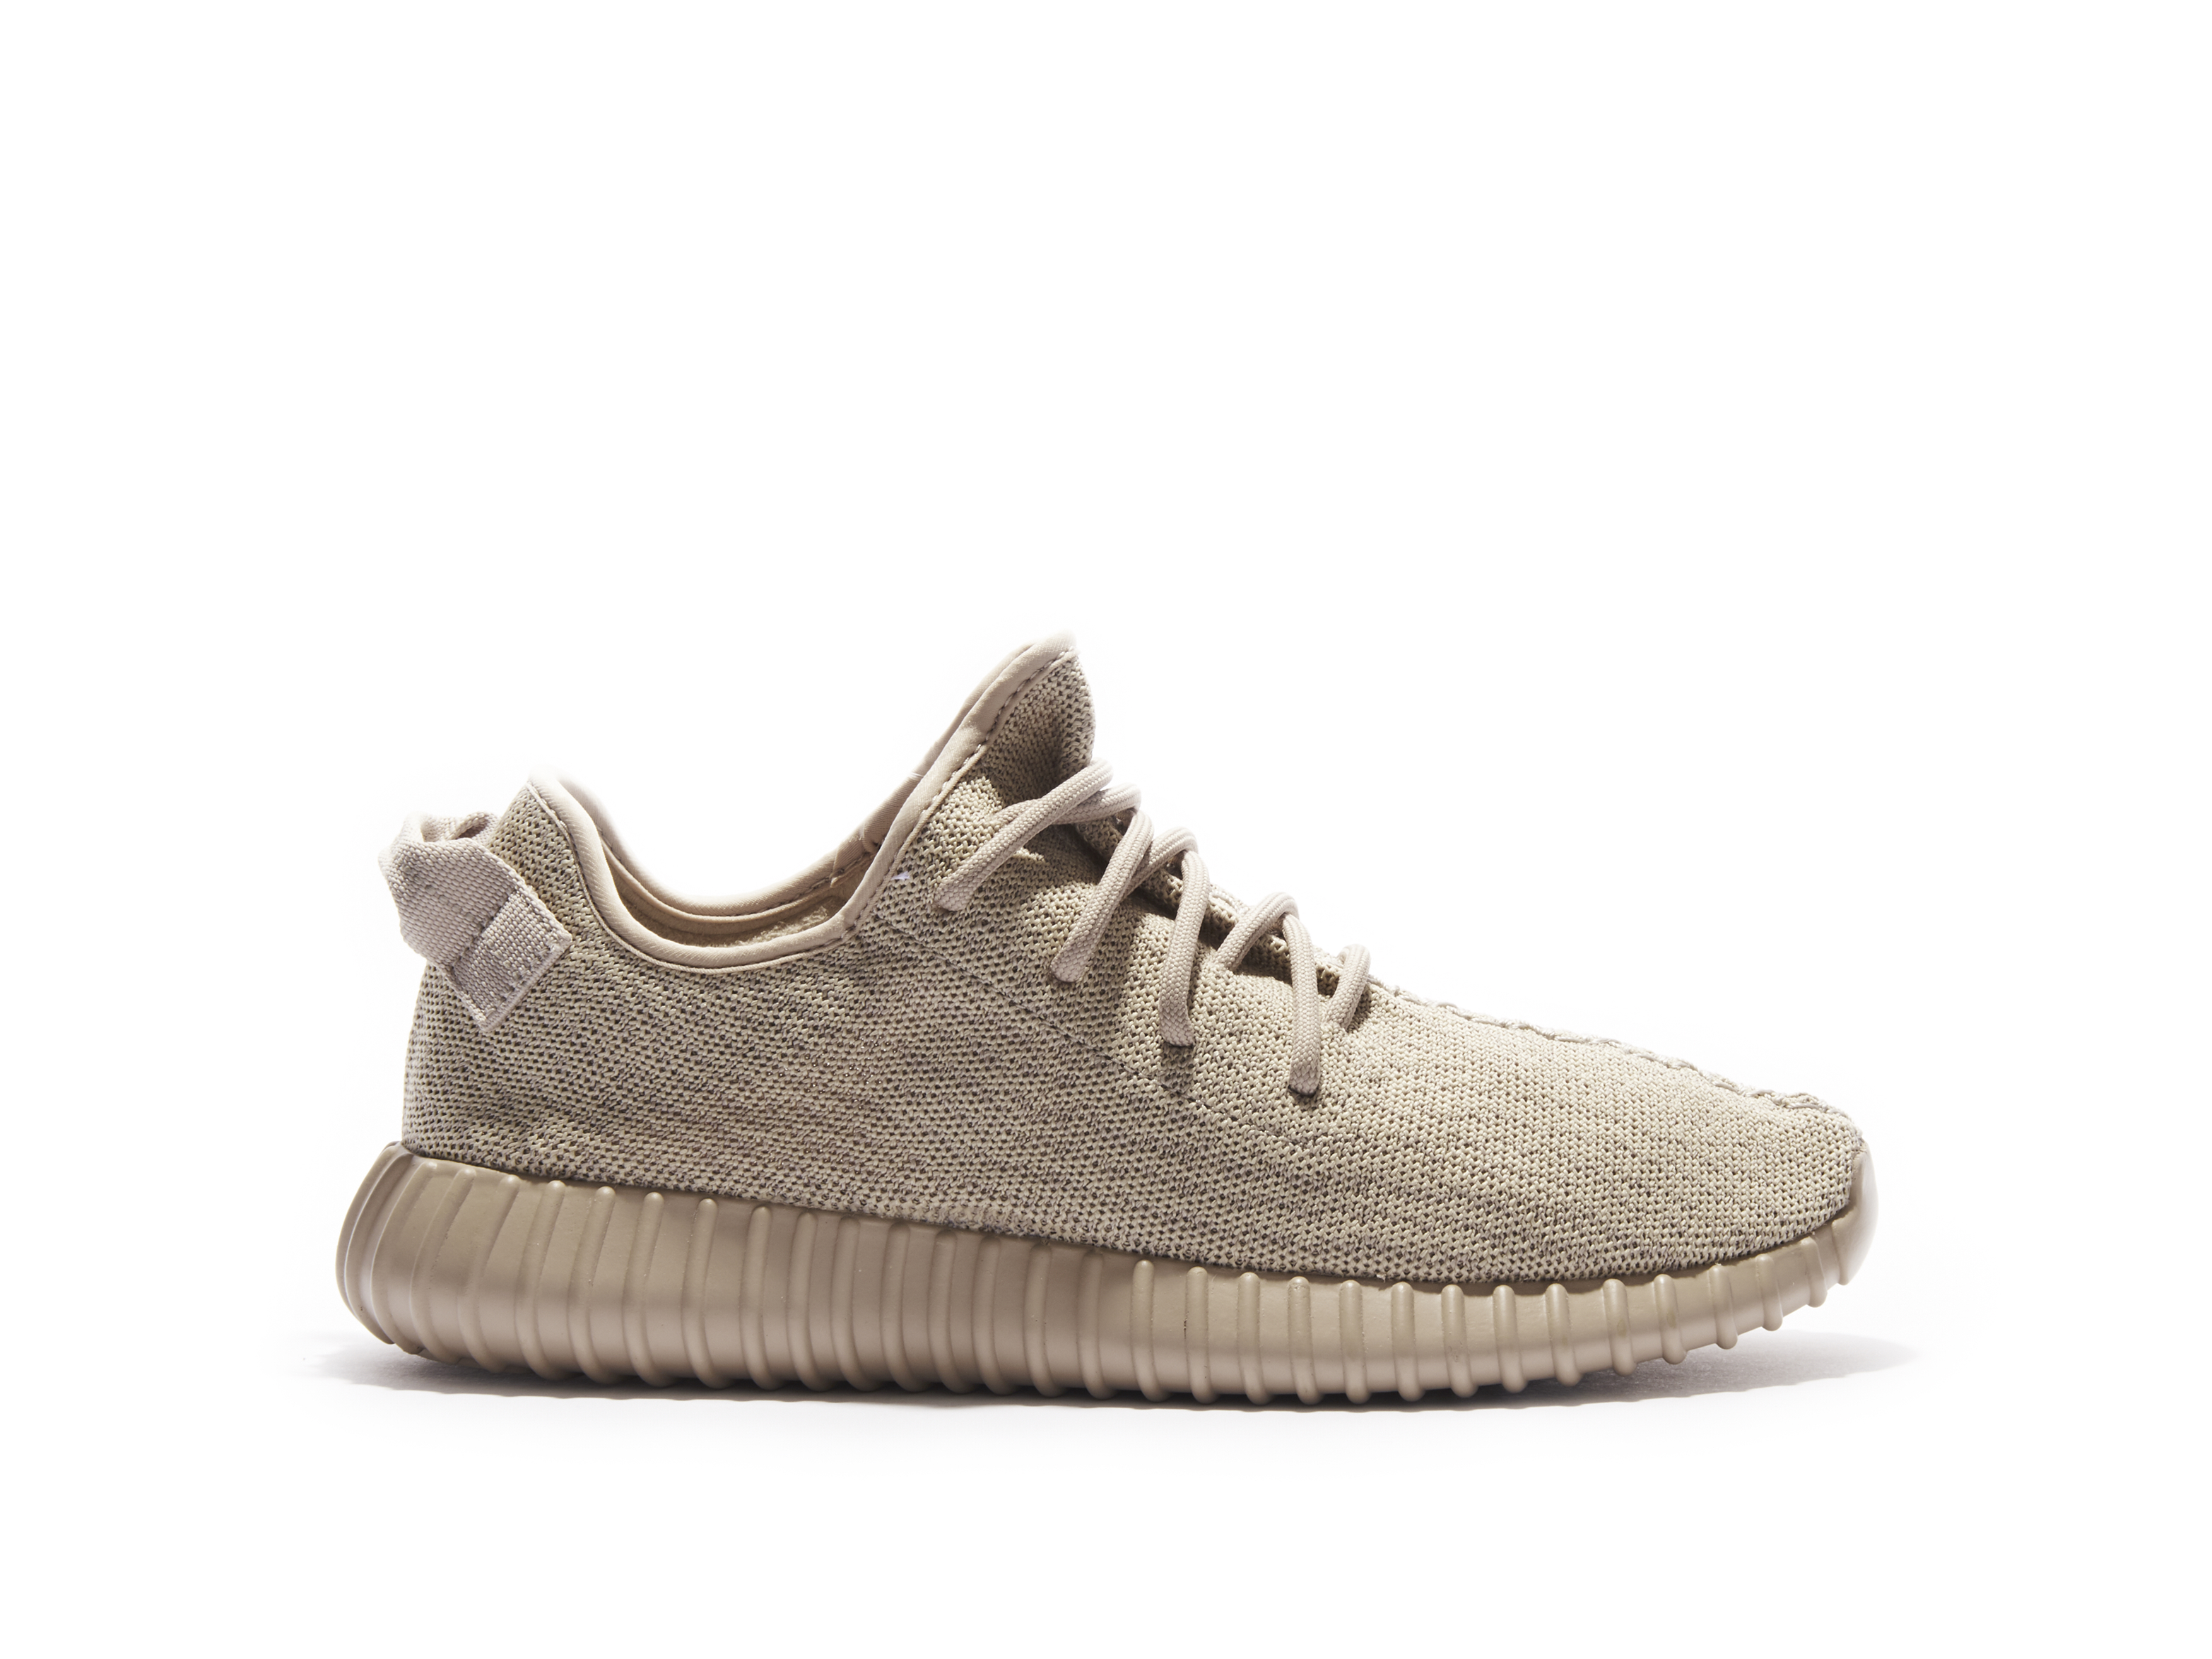 yeezy oxford tan for sale